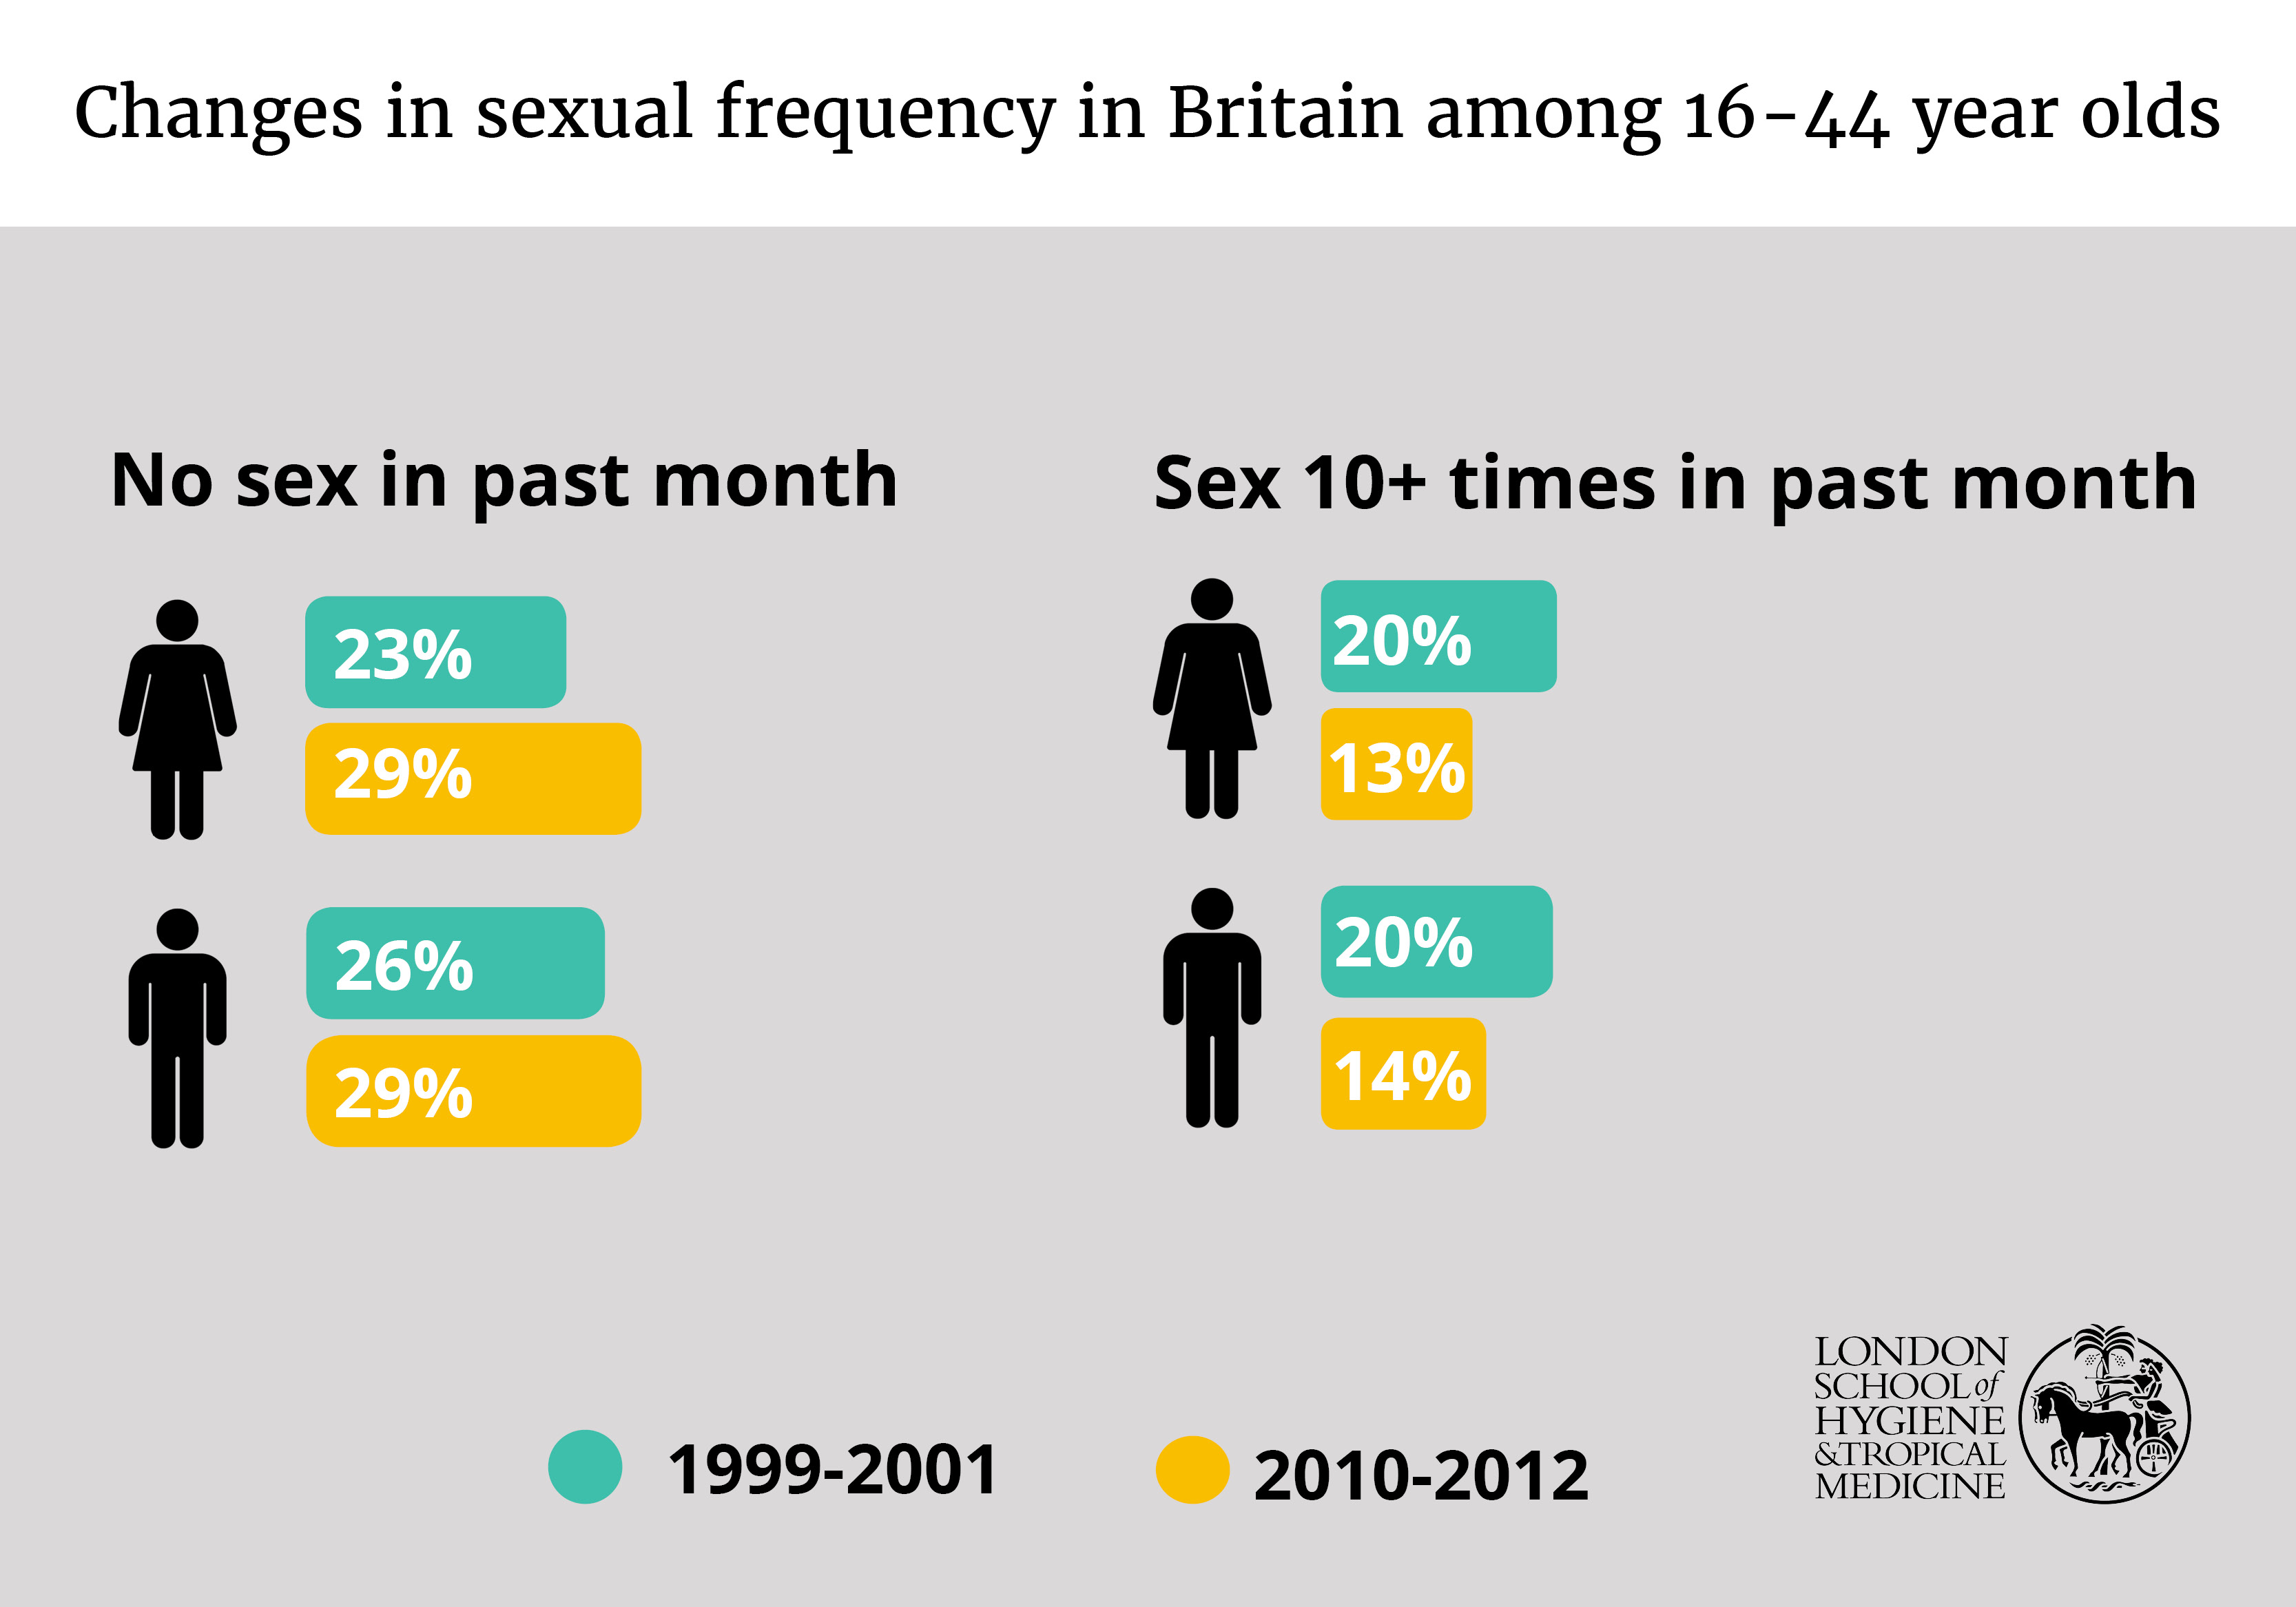 Declines in sexual frequency seen among